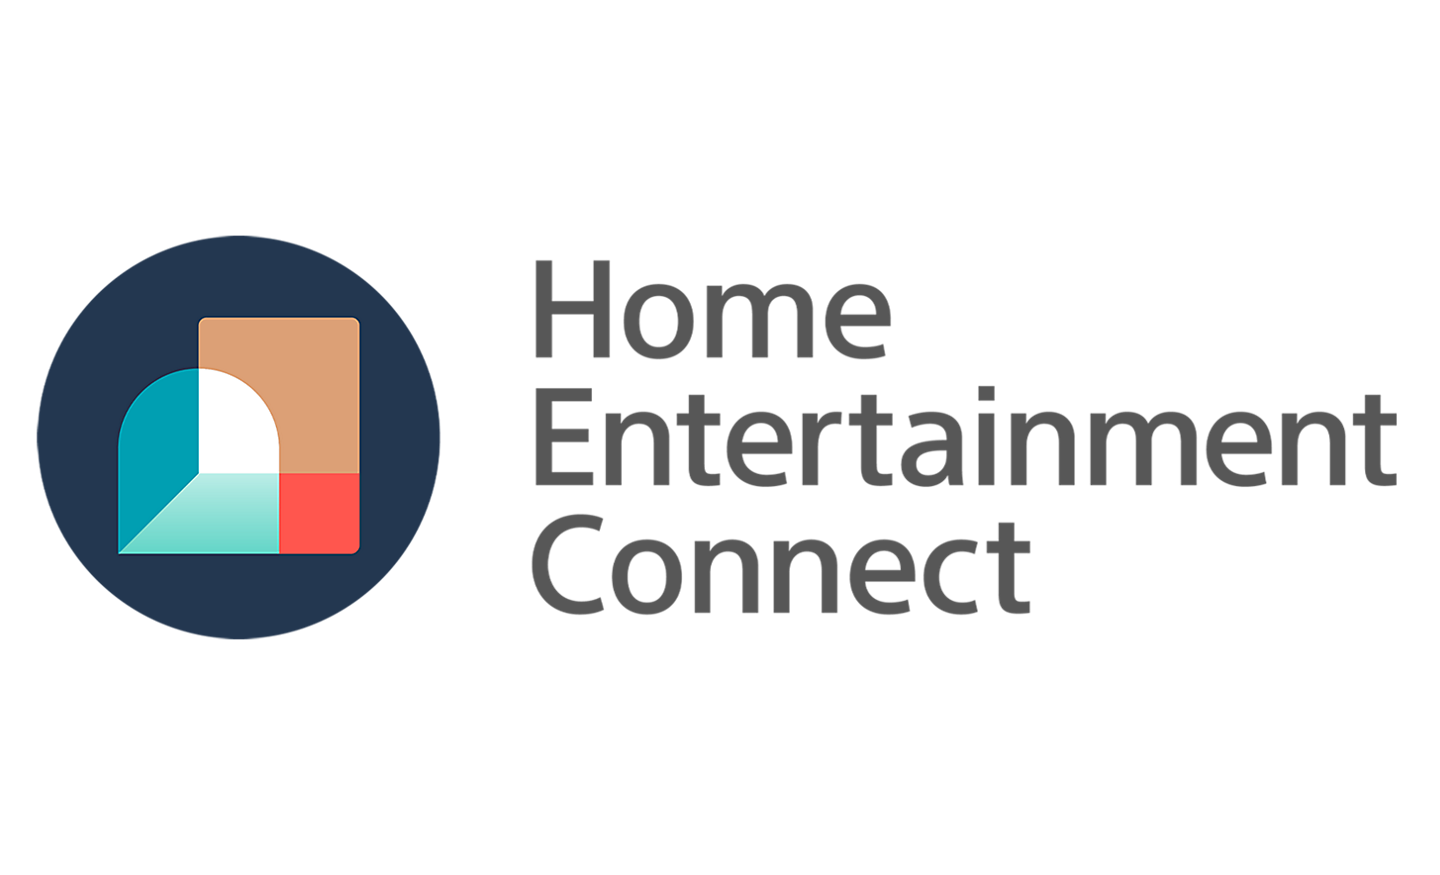 Image of a Home Entertainment Connect logo